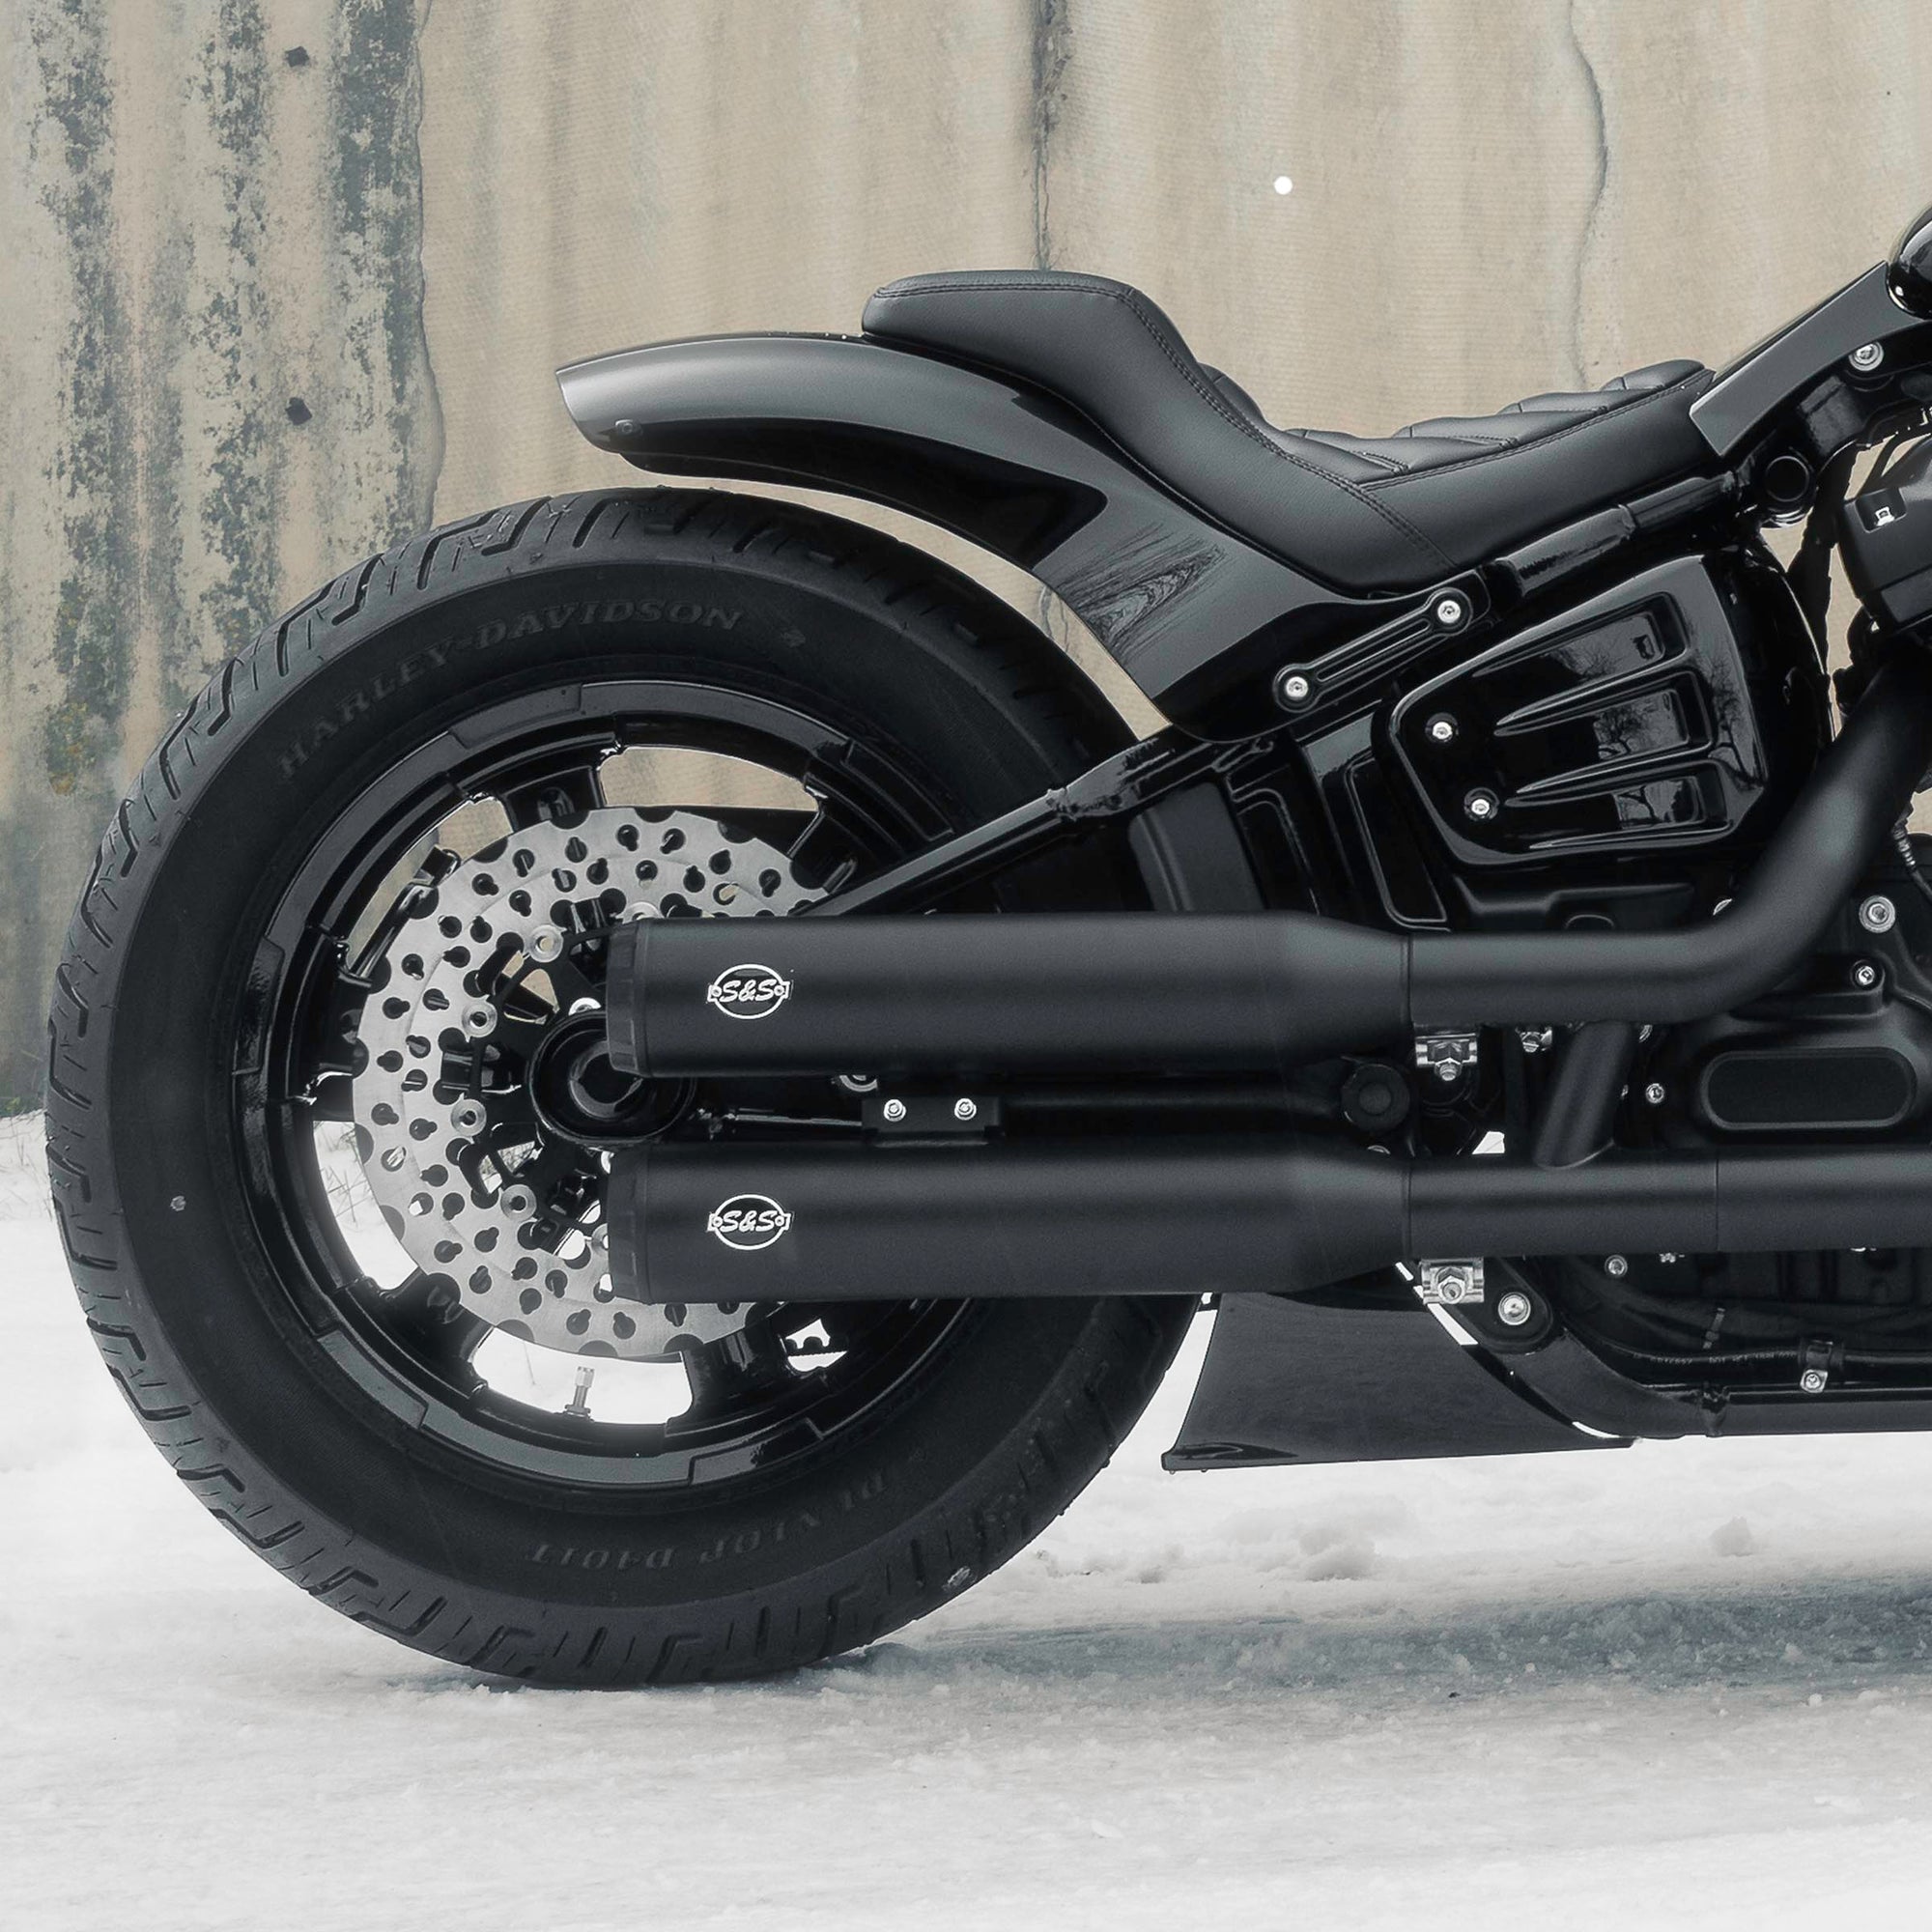 Zoomed Harley Davidson motorcycle with Killer Custom parts from the side outside with some visible snow on the ground neutral background